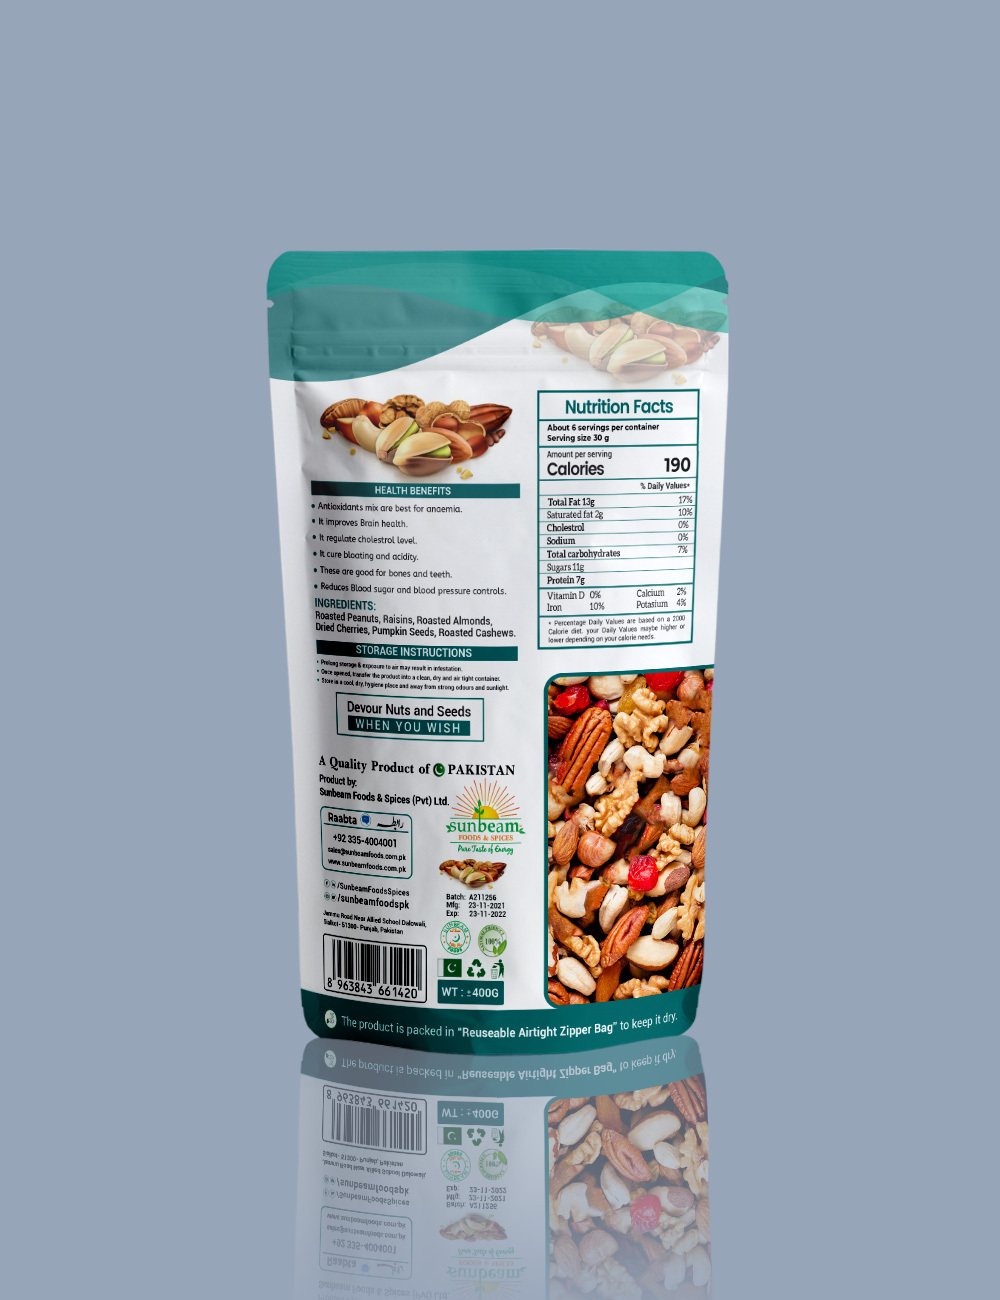 Protein Pack – Antioxidant Mix